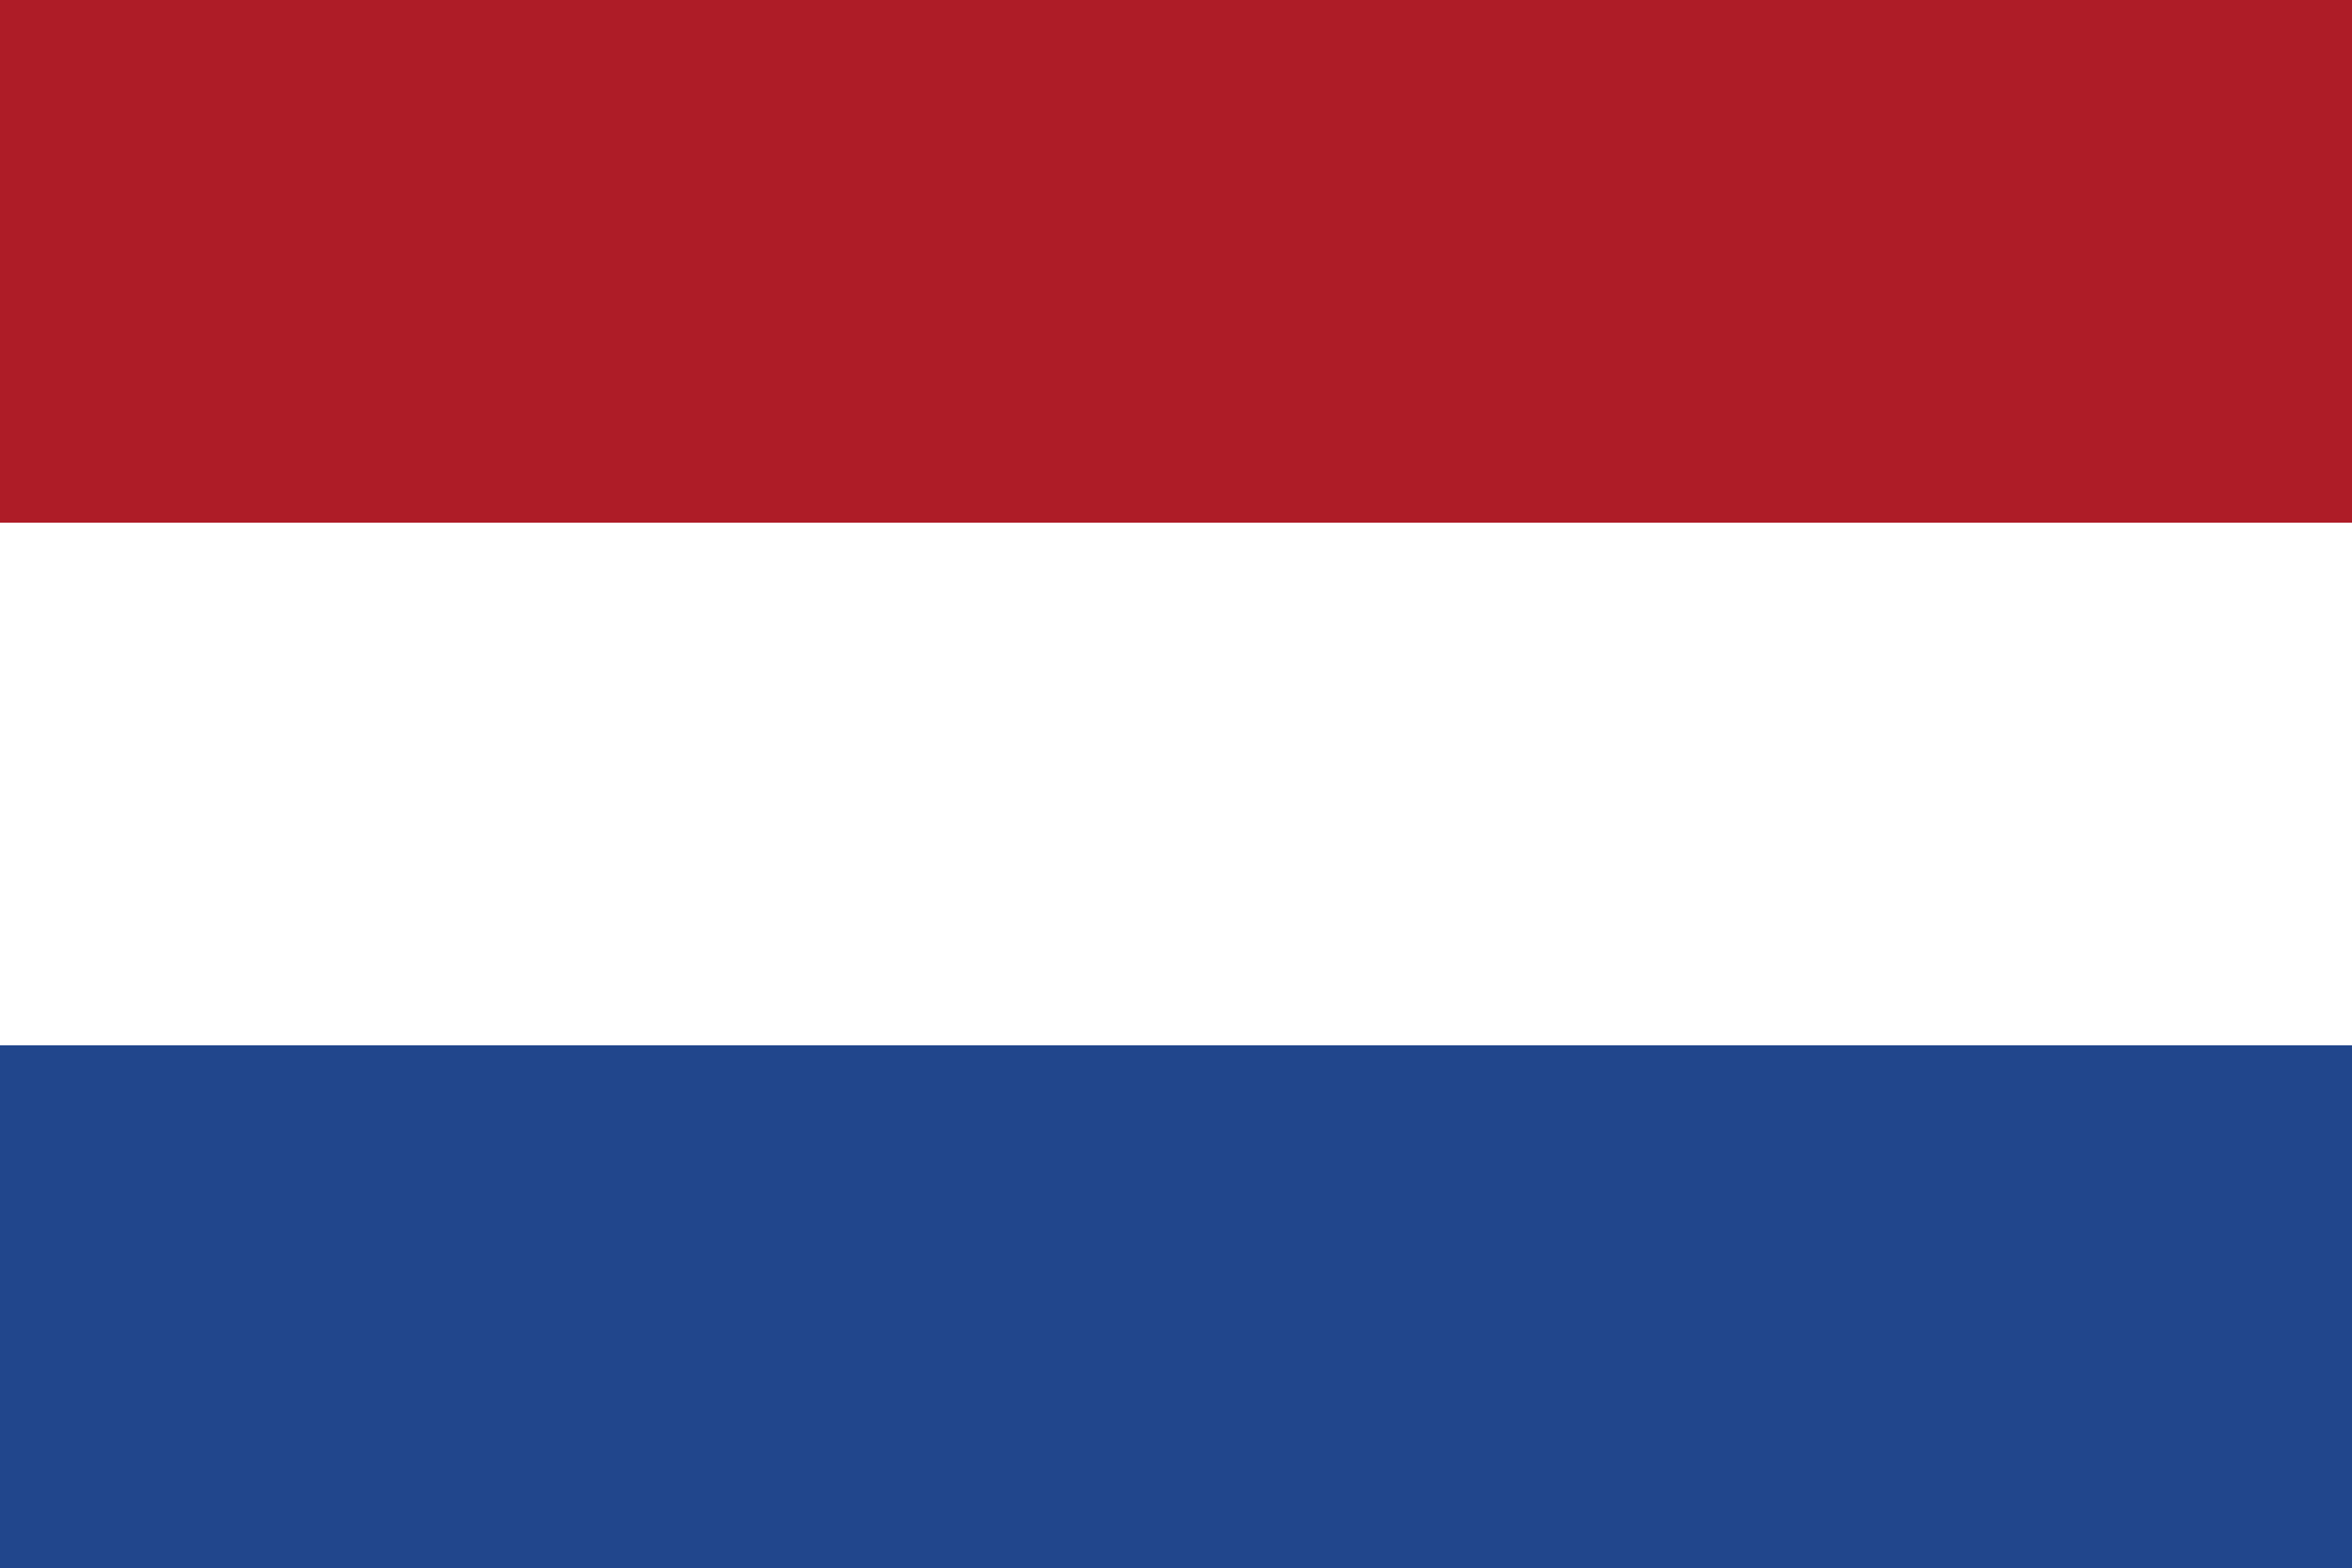 Drone Laws in the Netherlands